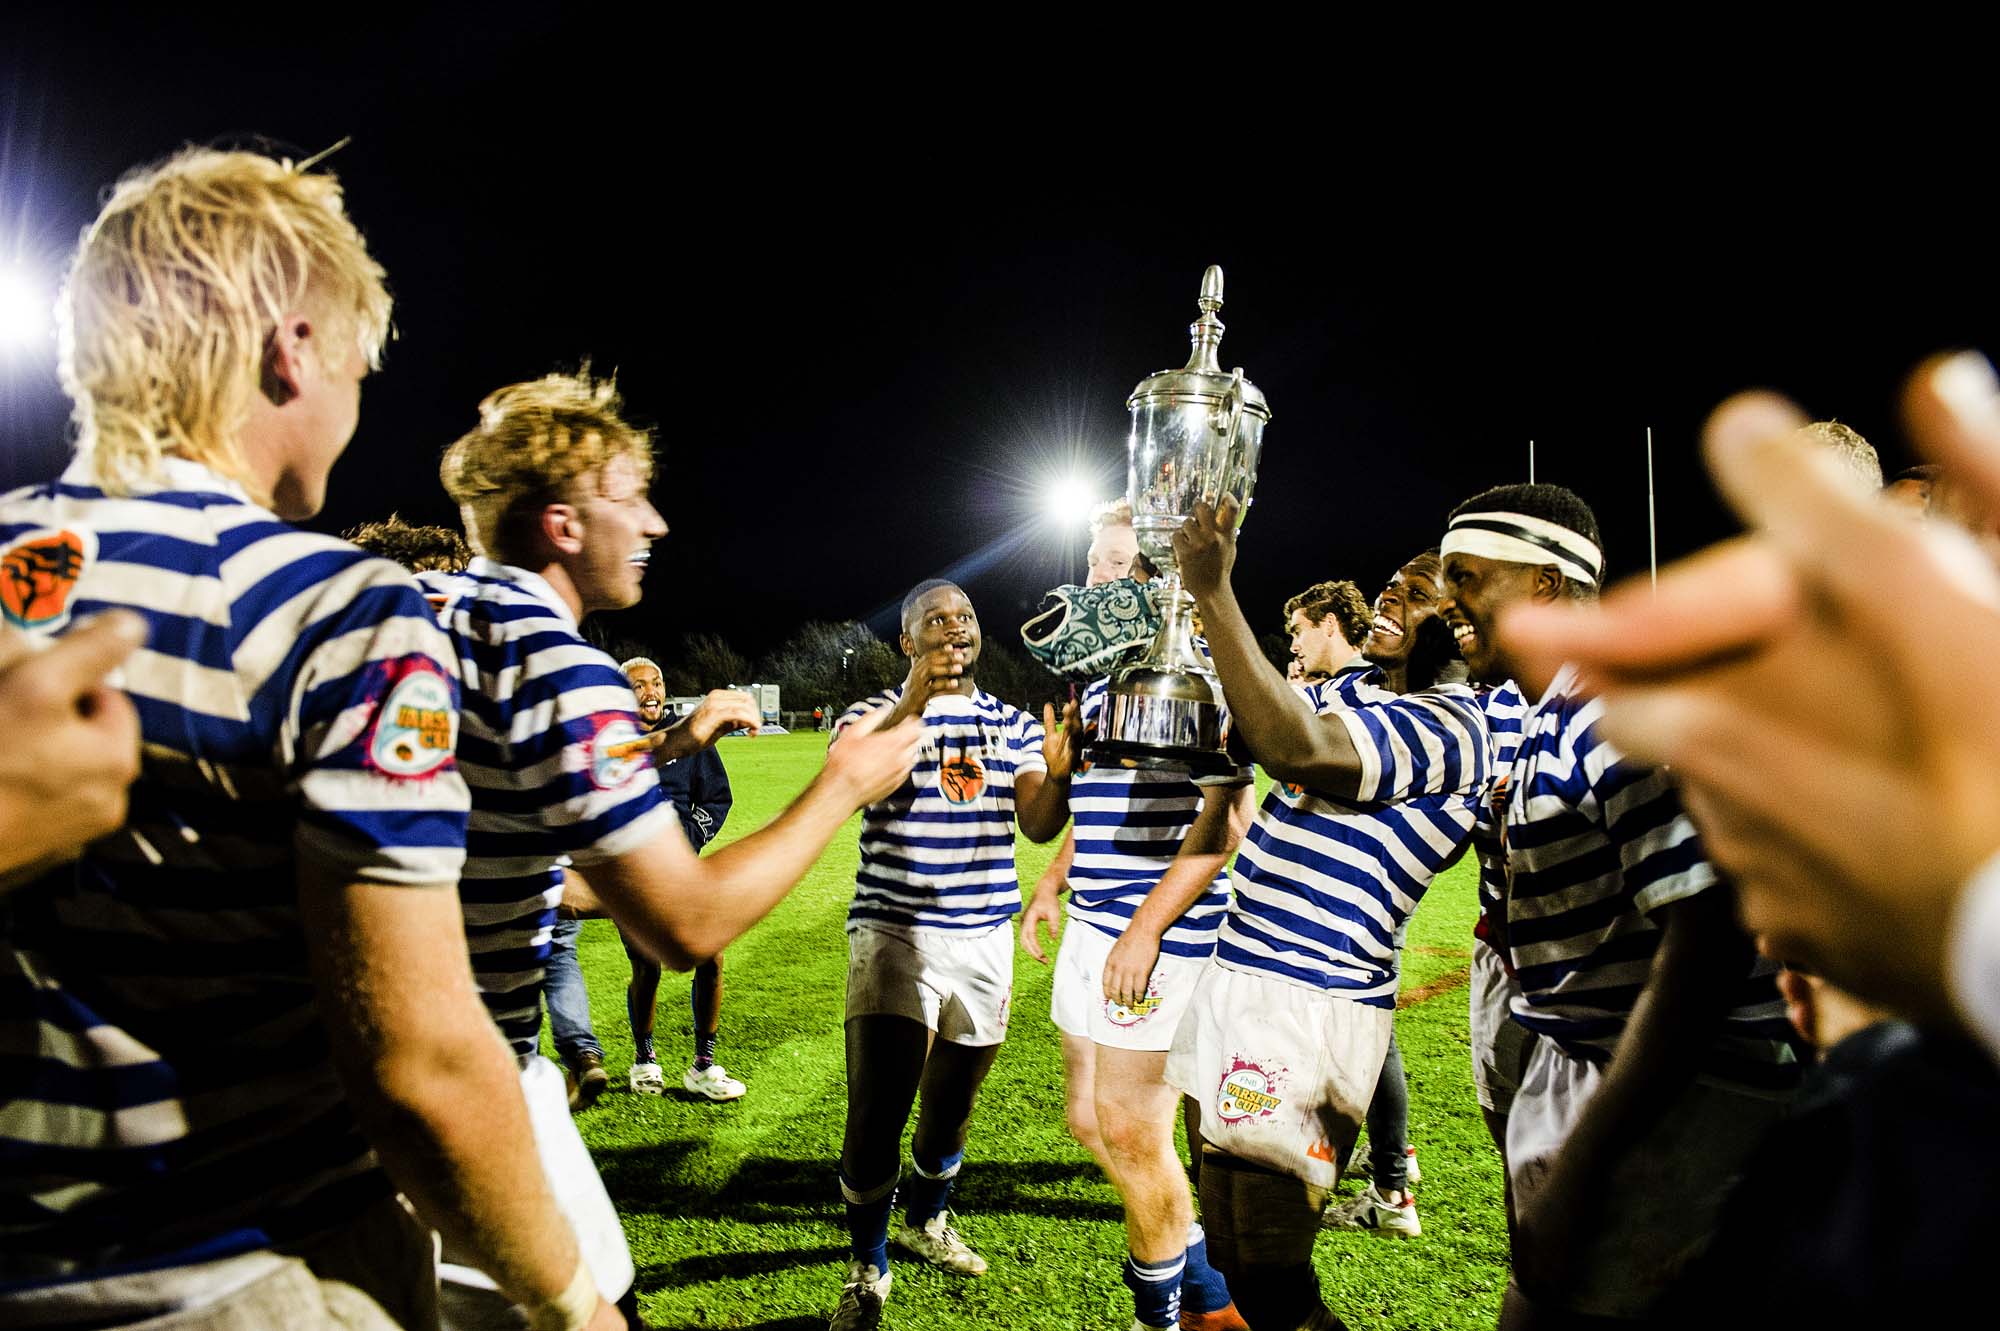 UCT’s Rugby team, the Ikeys, won the Varsity Cup final, playing against Maties. It was a home-ground win for the Ikeys. Photo Lerato Maduna.